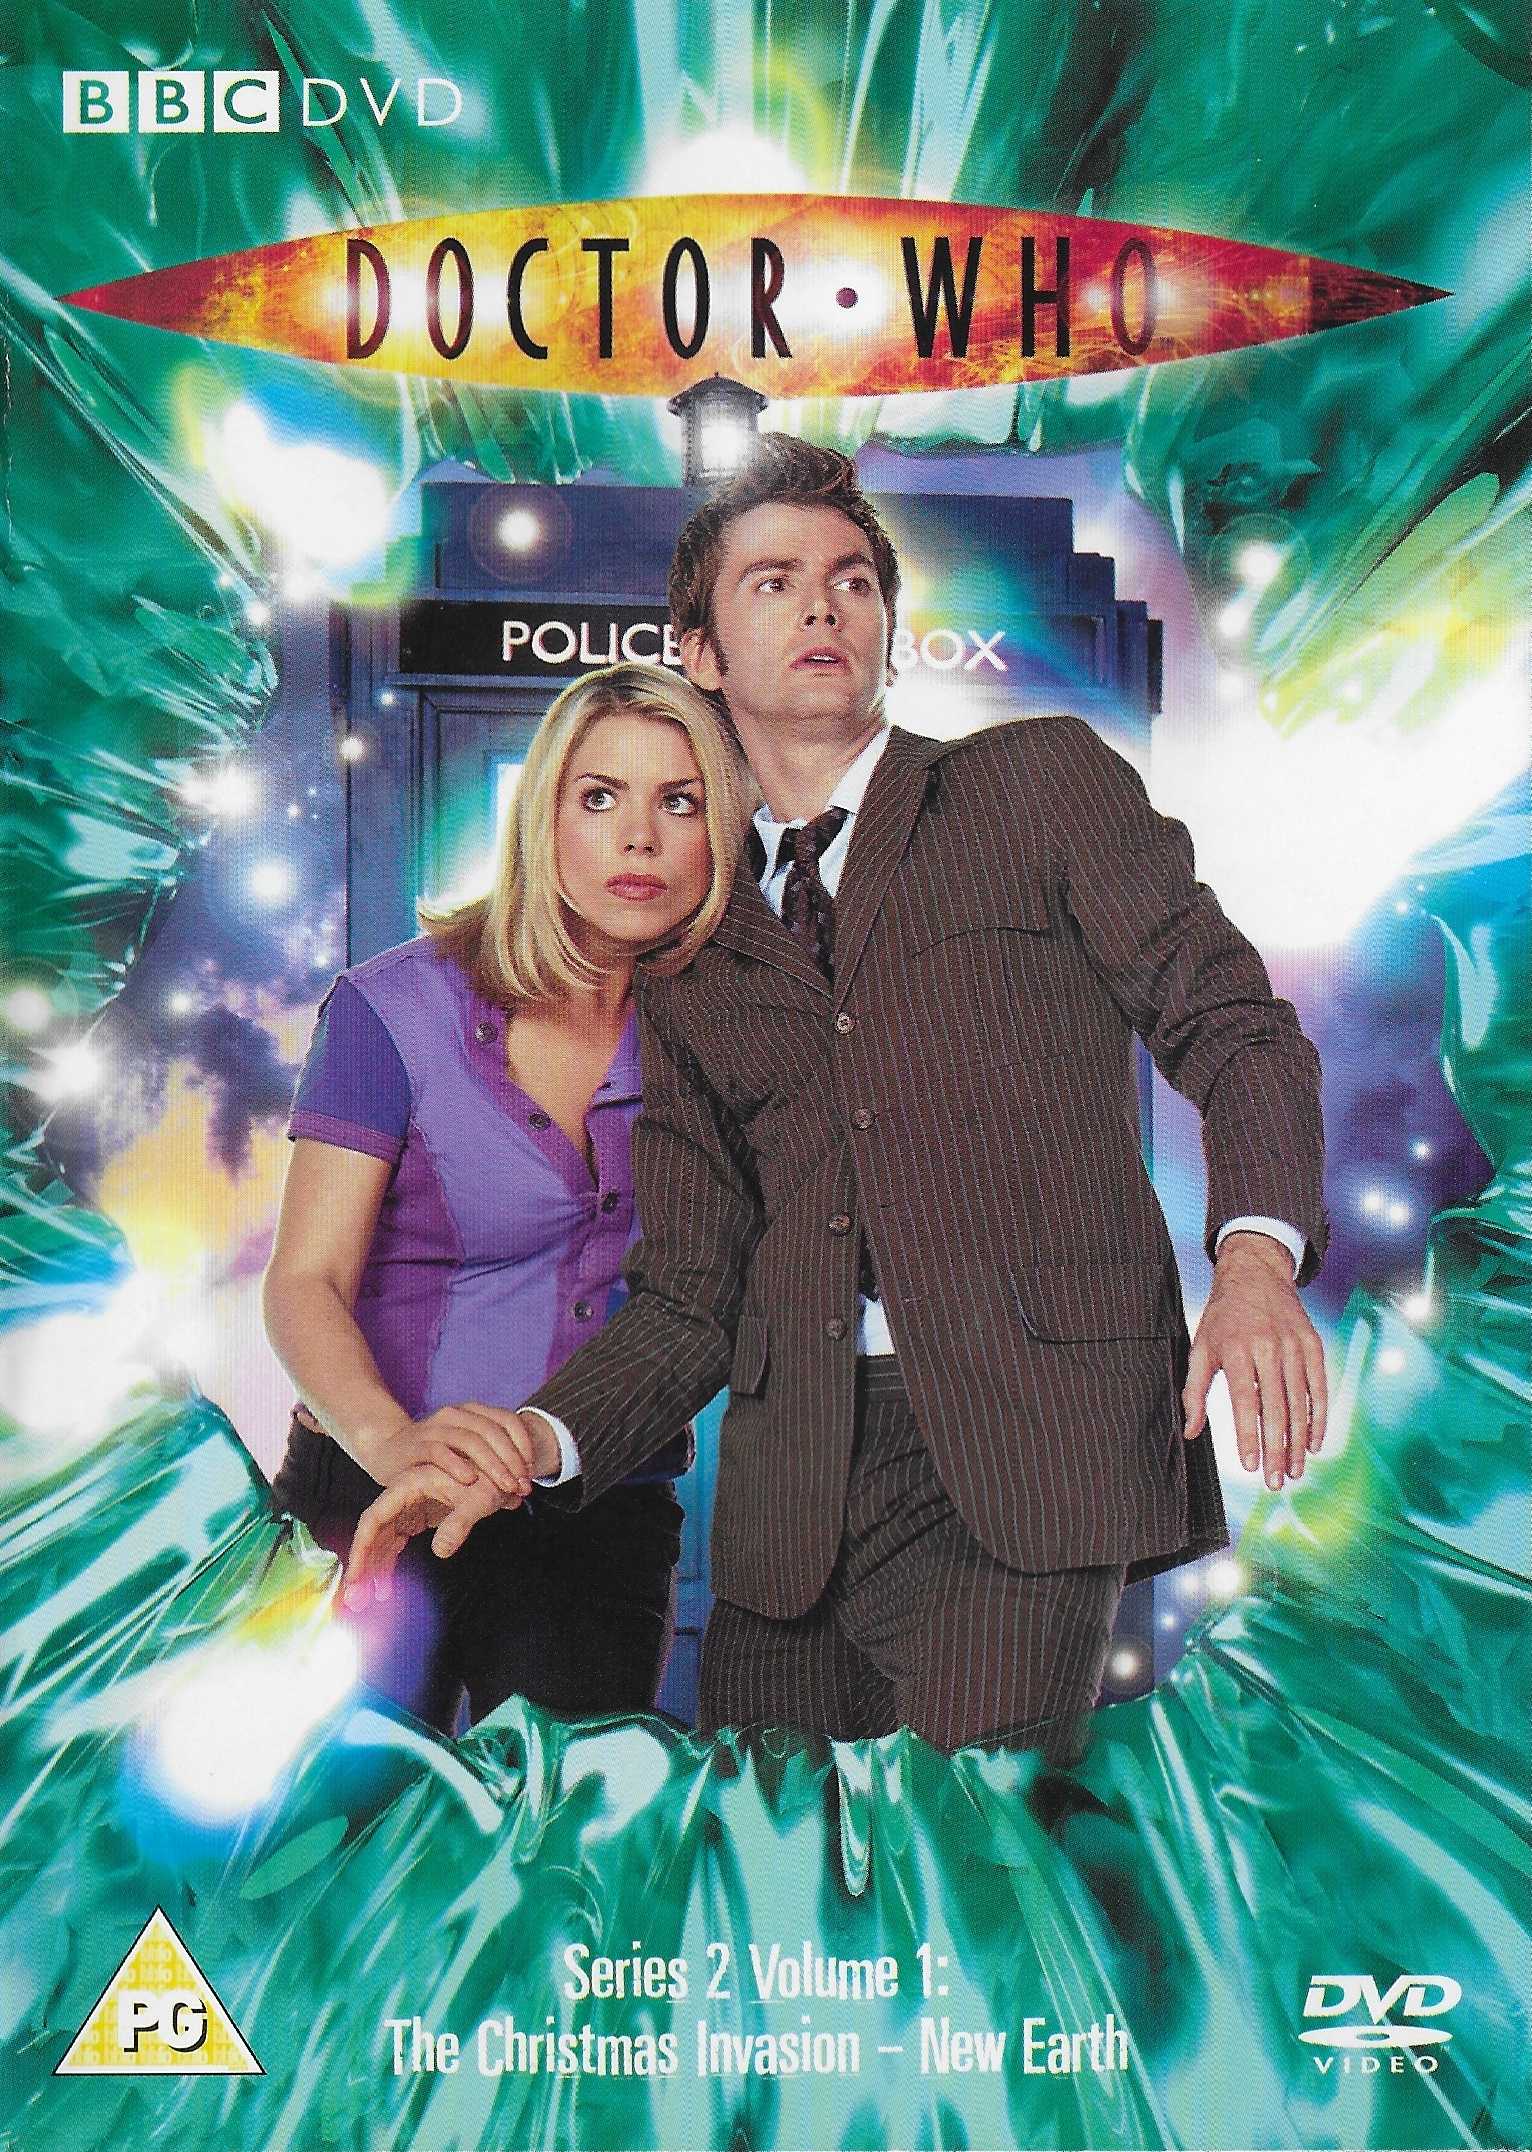 Picture of BBCDVD 1960 Doctor Who - Series 2, volume 1 by artist Russell T Davies from the BBC dvds - Records and Tapes library